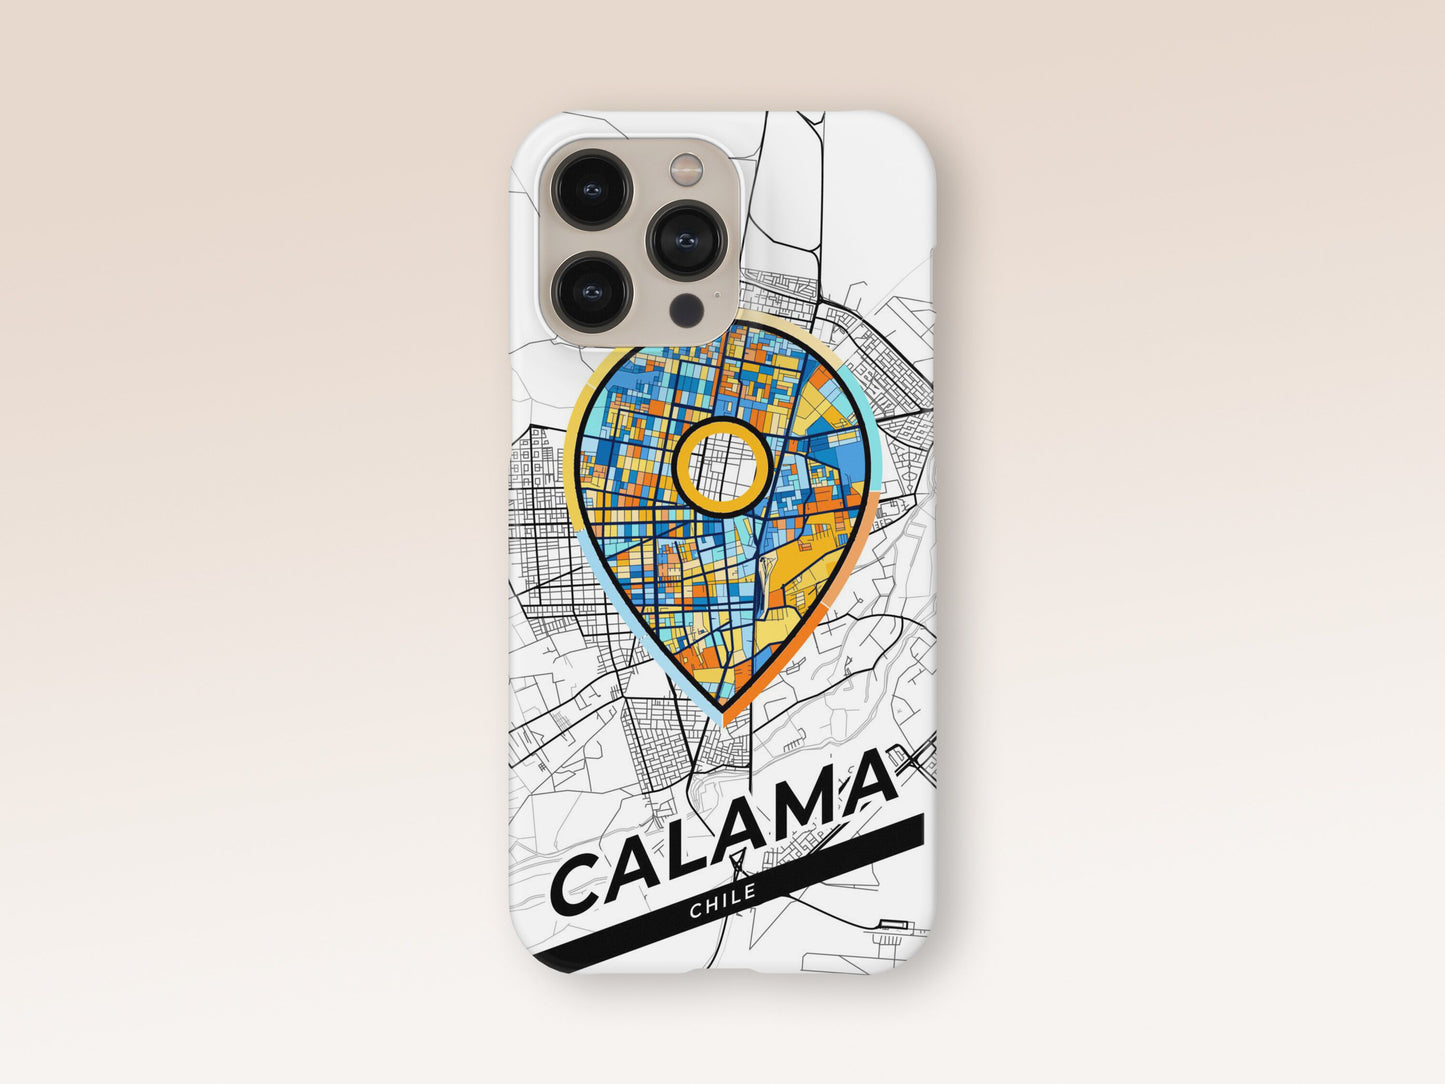 Calama Chile slim phone case with colorful icon. Birthday, wedding or housewarming gift. Couple match cases. 1